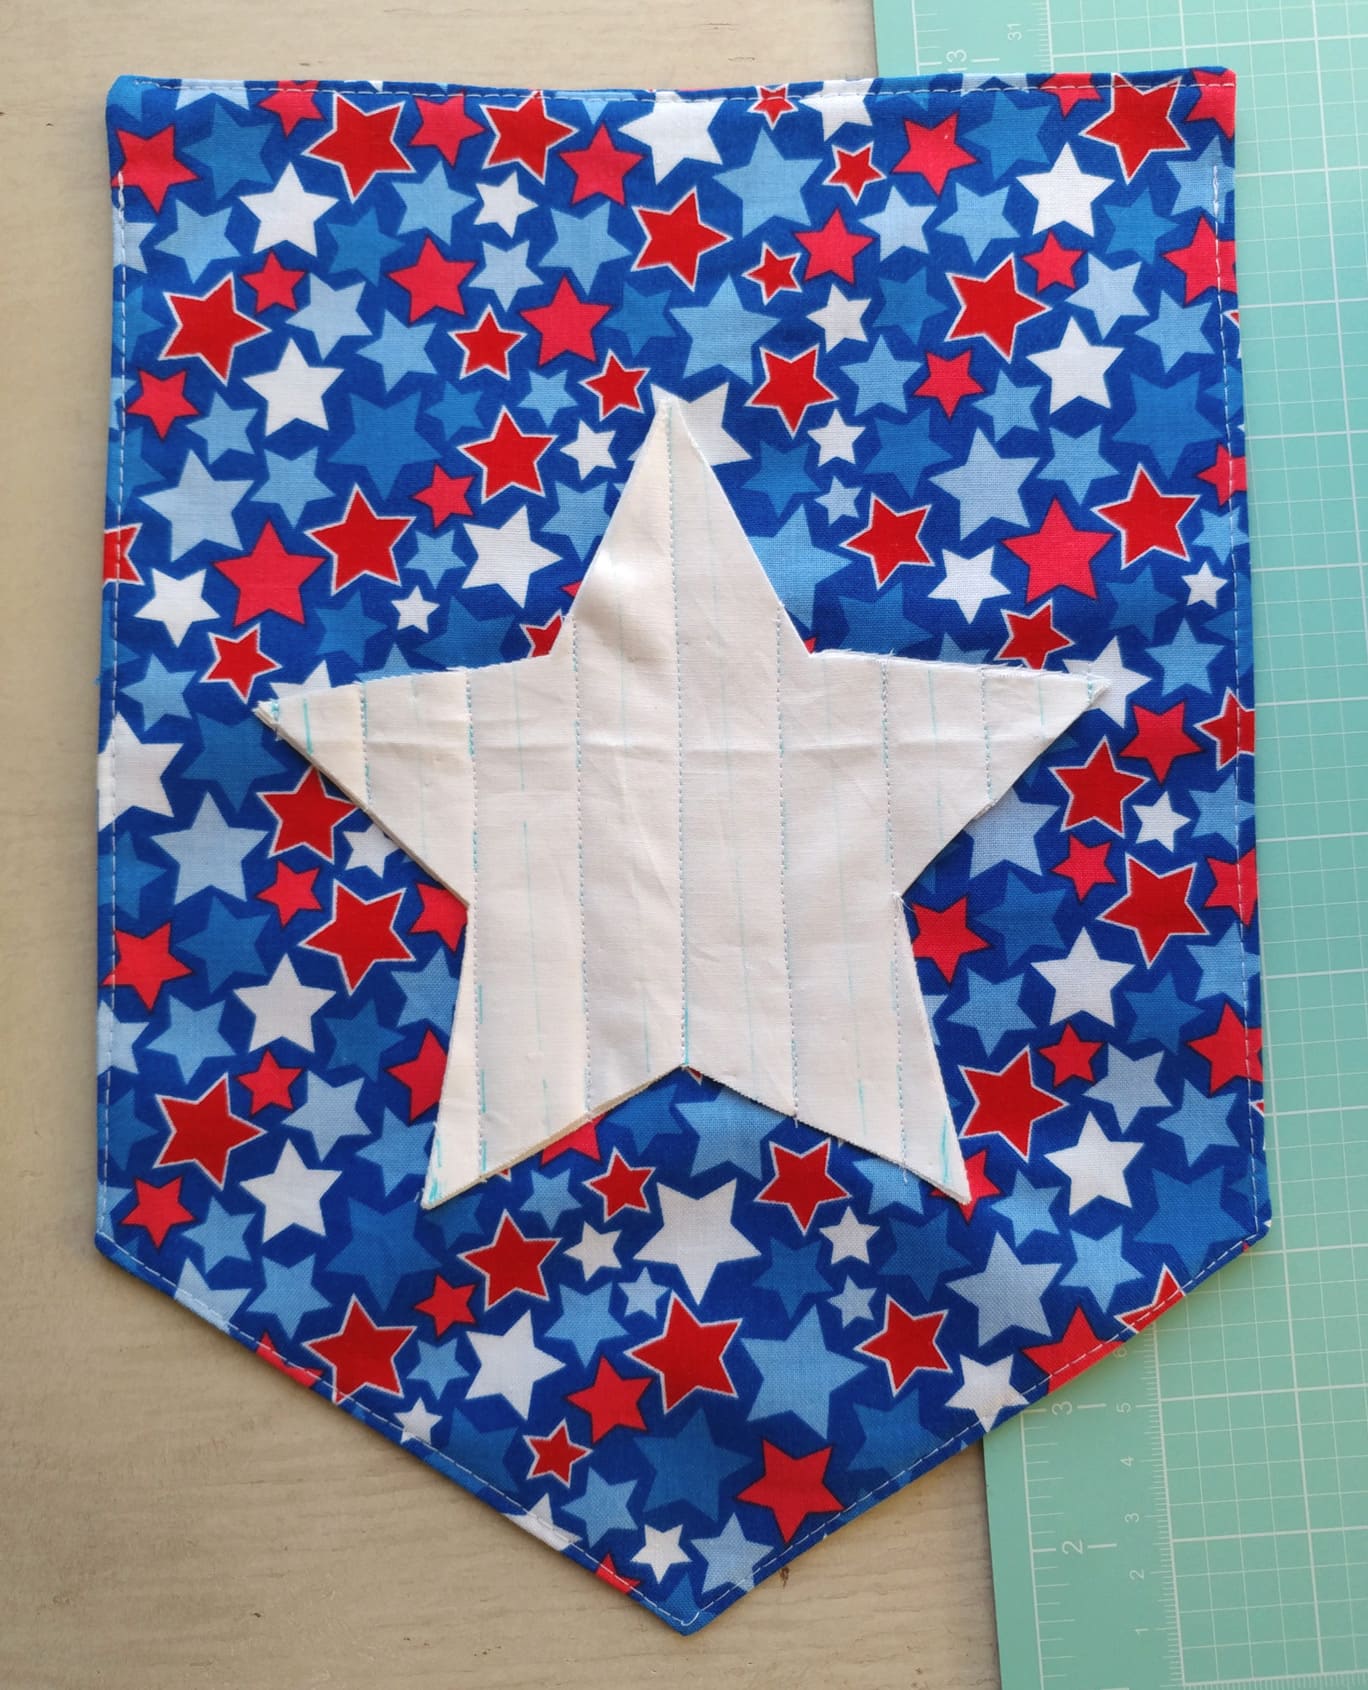 Chenille Star Banner Sewing Tutorial, a free 4th of July Craft idea, makes such a cute fourth of July decoration! #4thofjuly #4thofjulycrafts #4thofjulysewing #smallsewingproject 